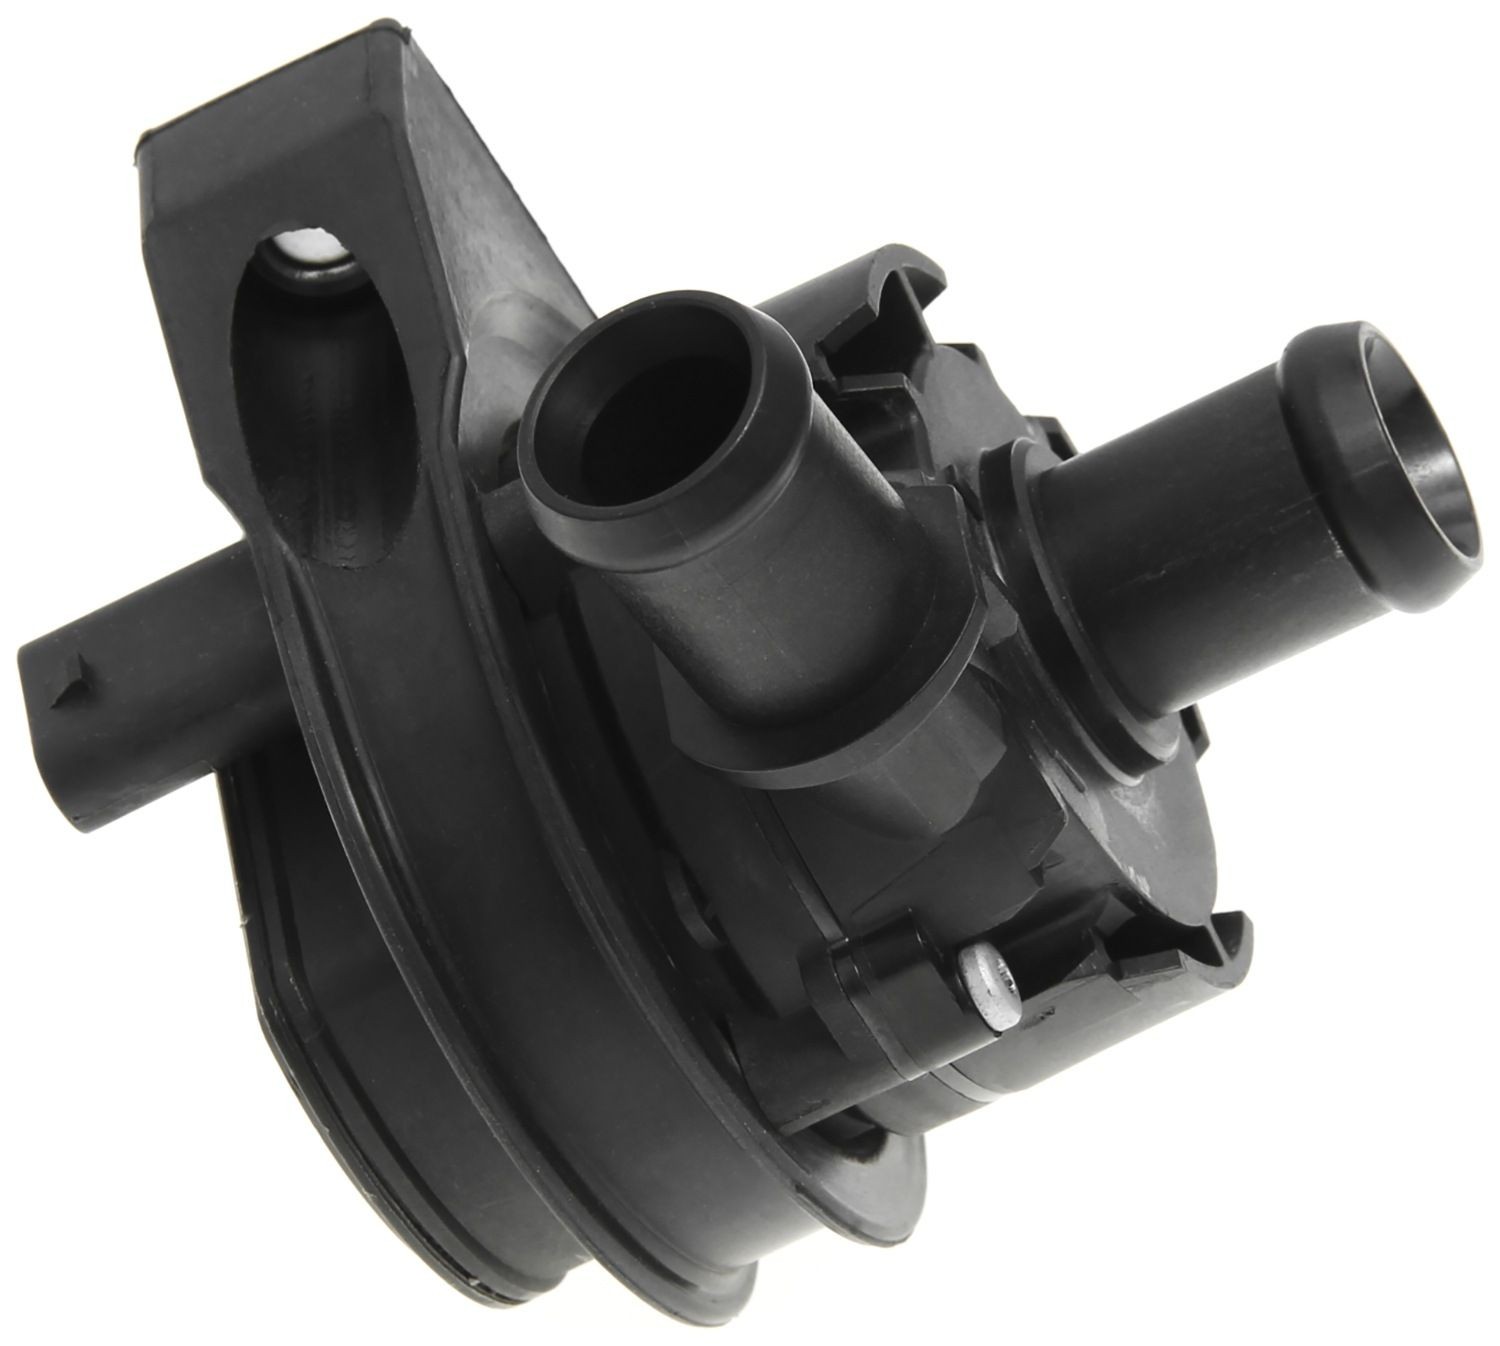 GATES 41554E Water pump with bracket, Electric